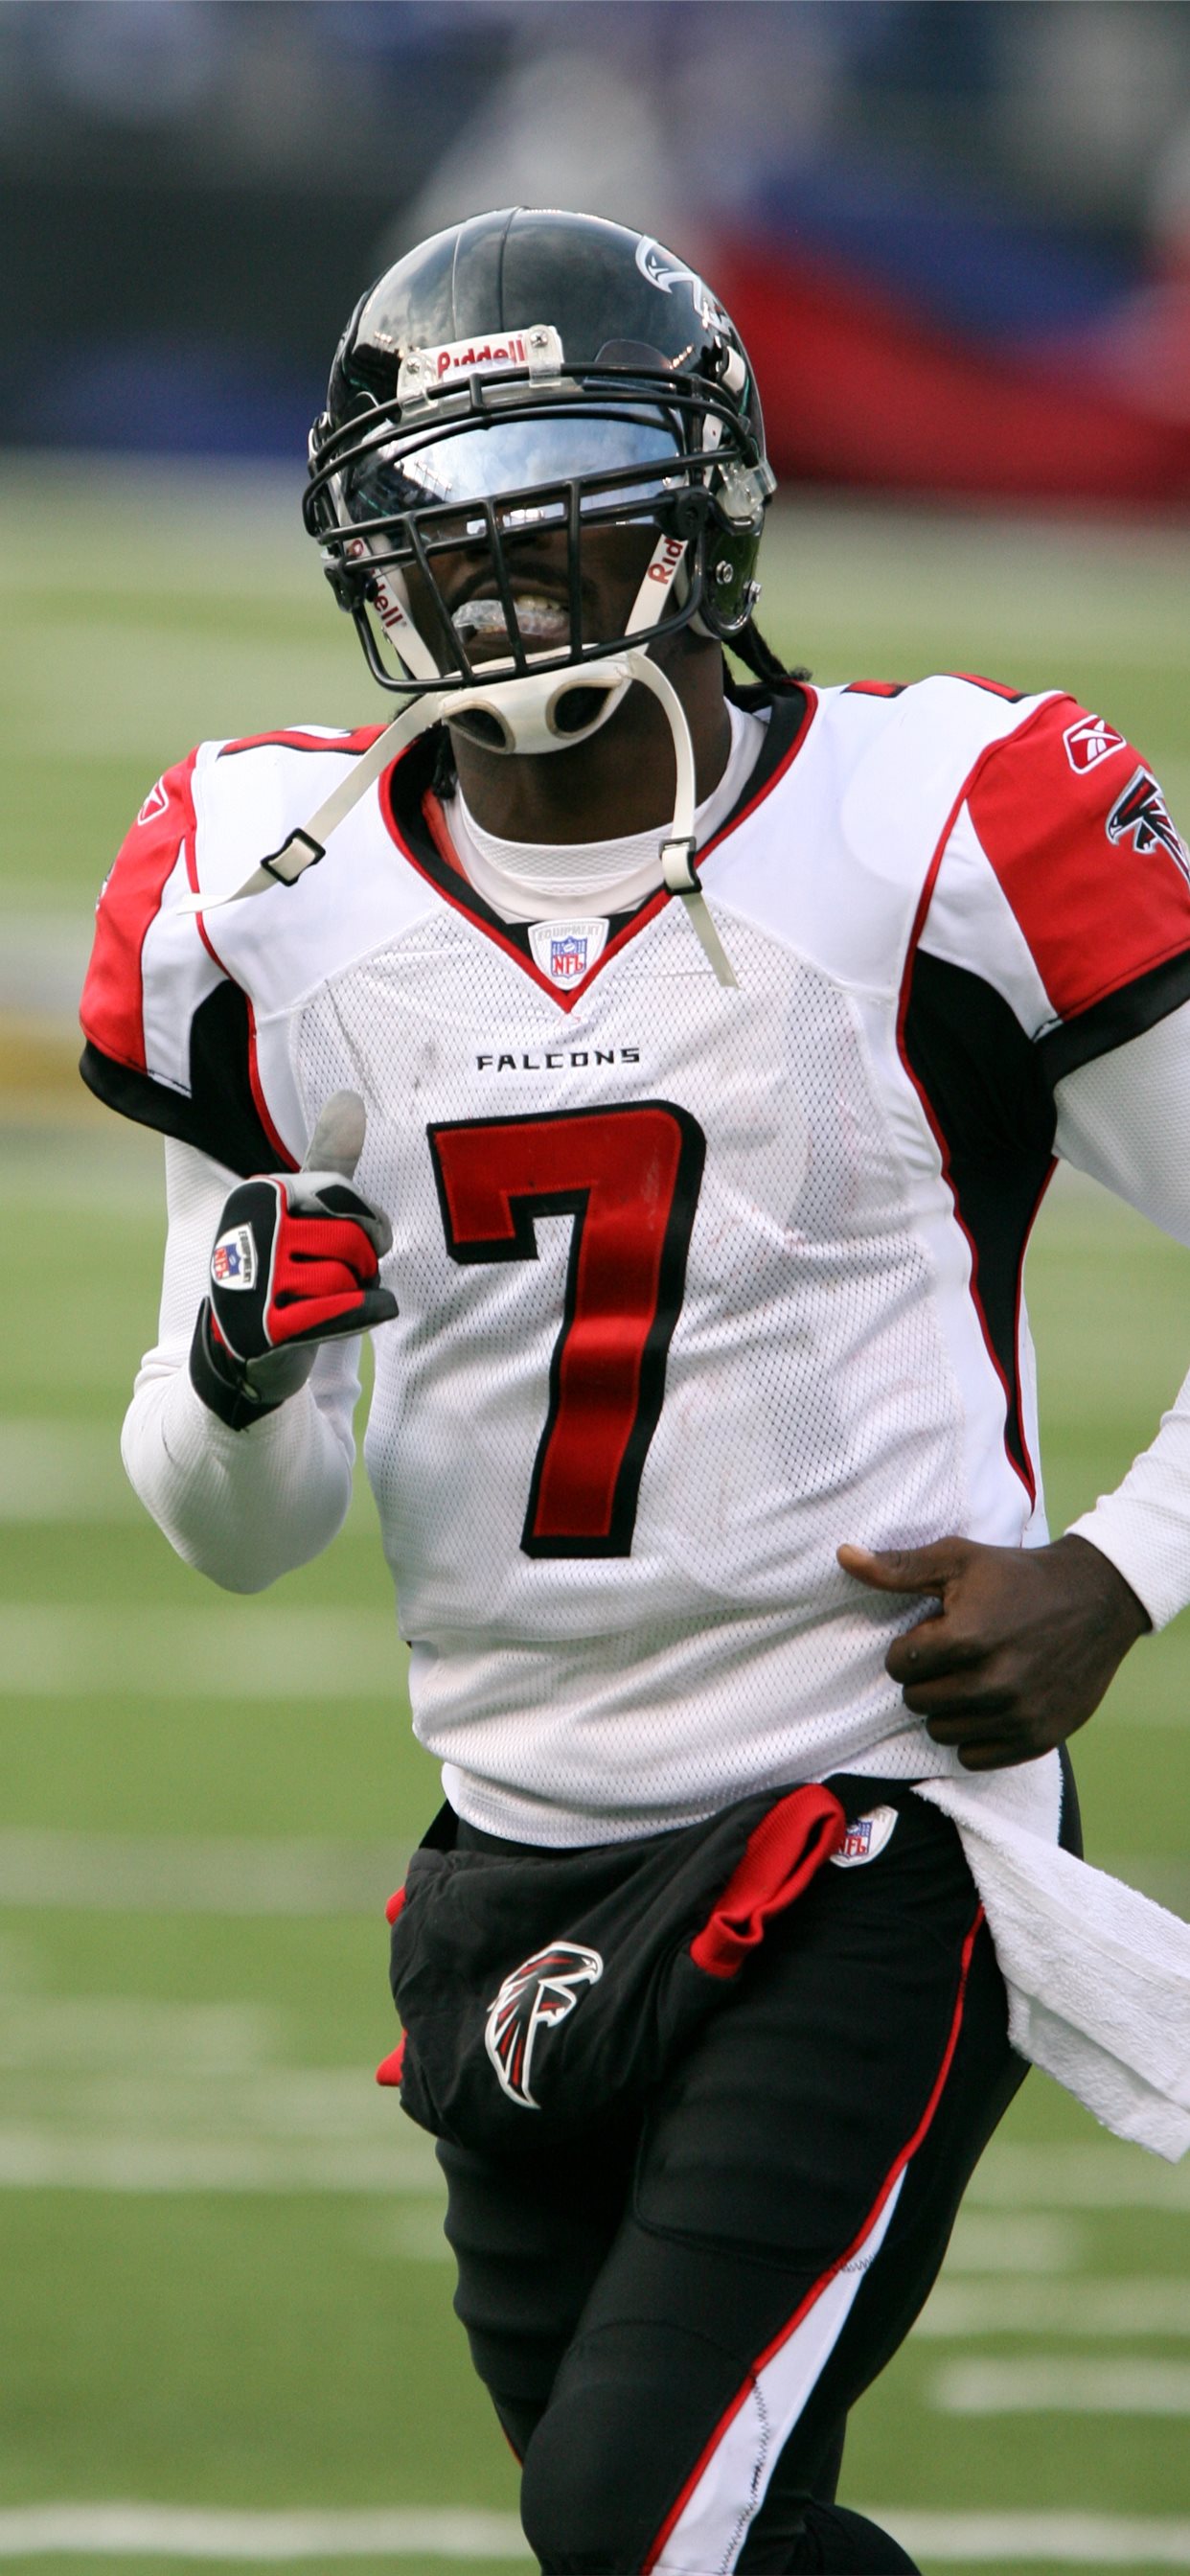 Michael Vick Wikipedia Iphone Wallpapers Free Download